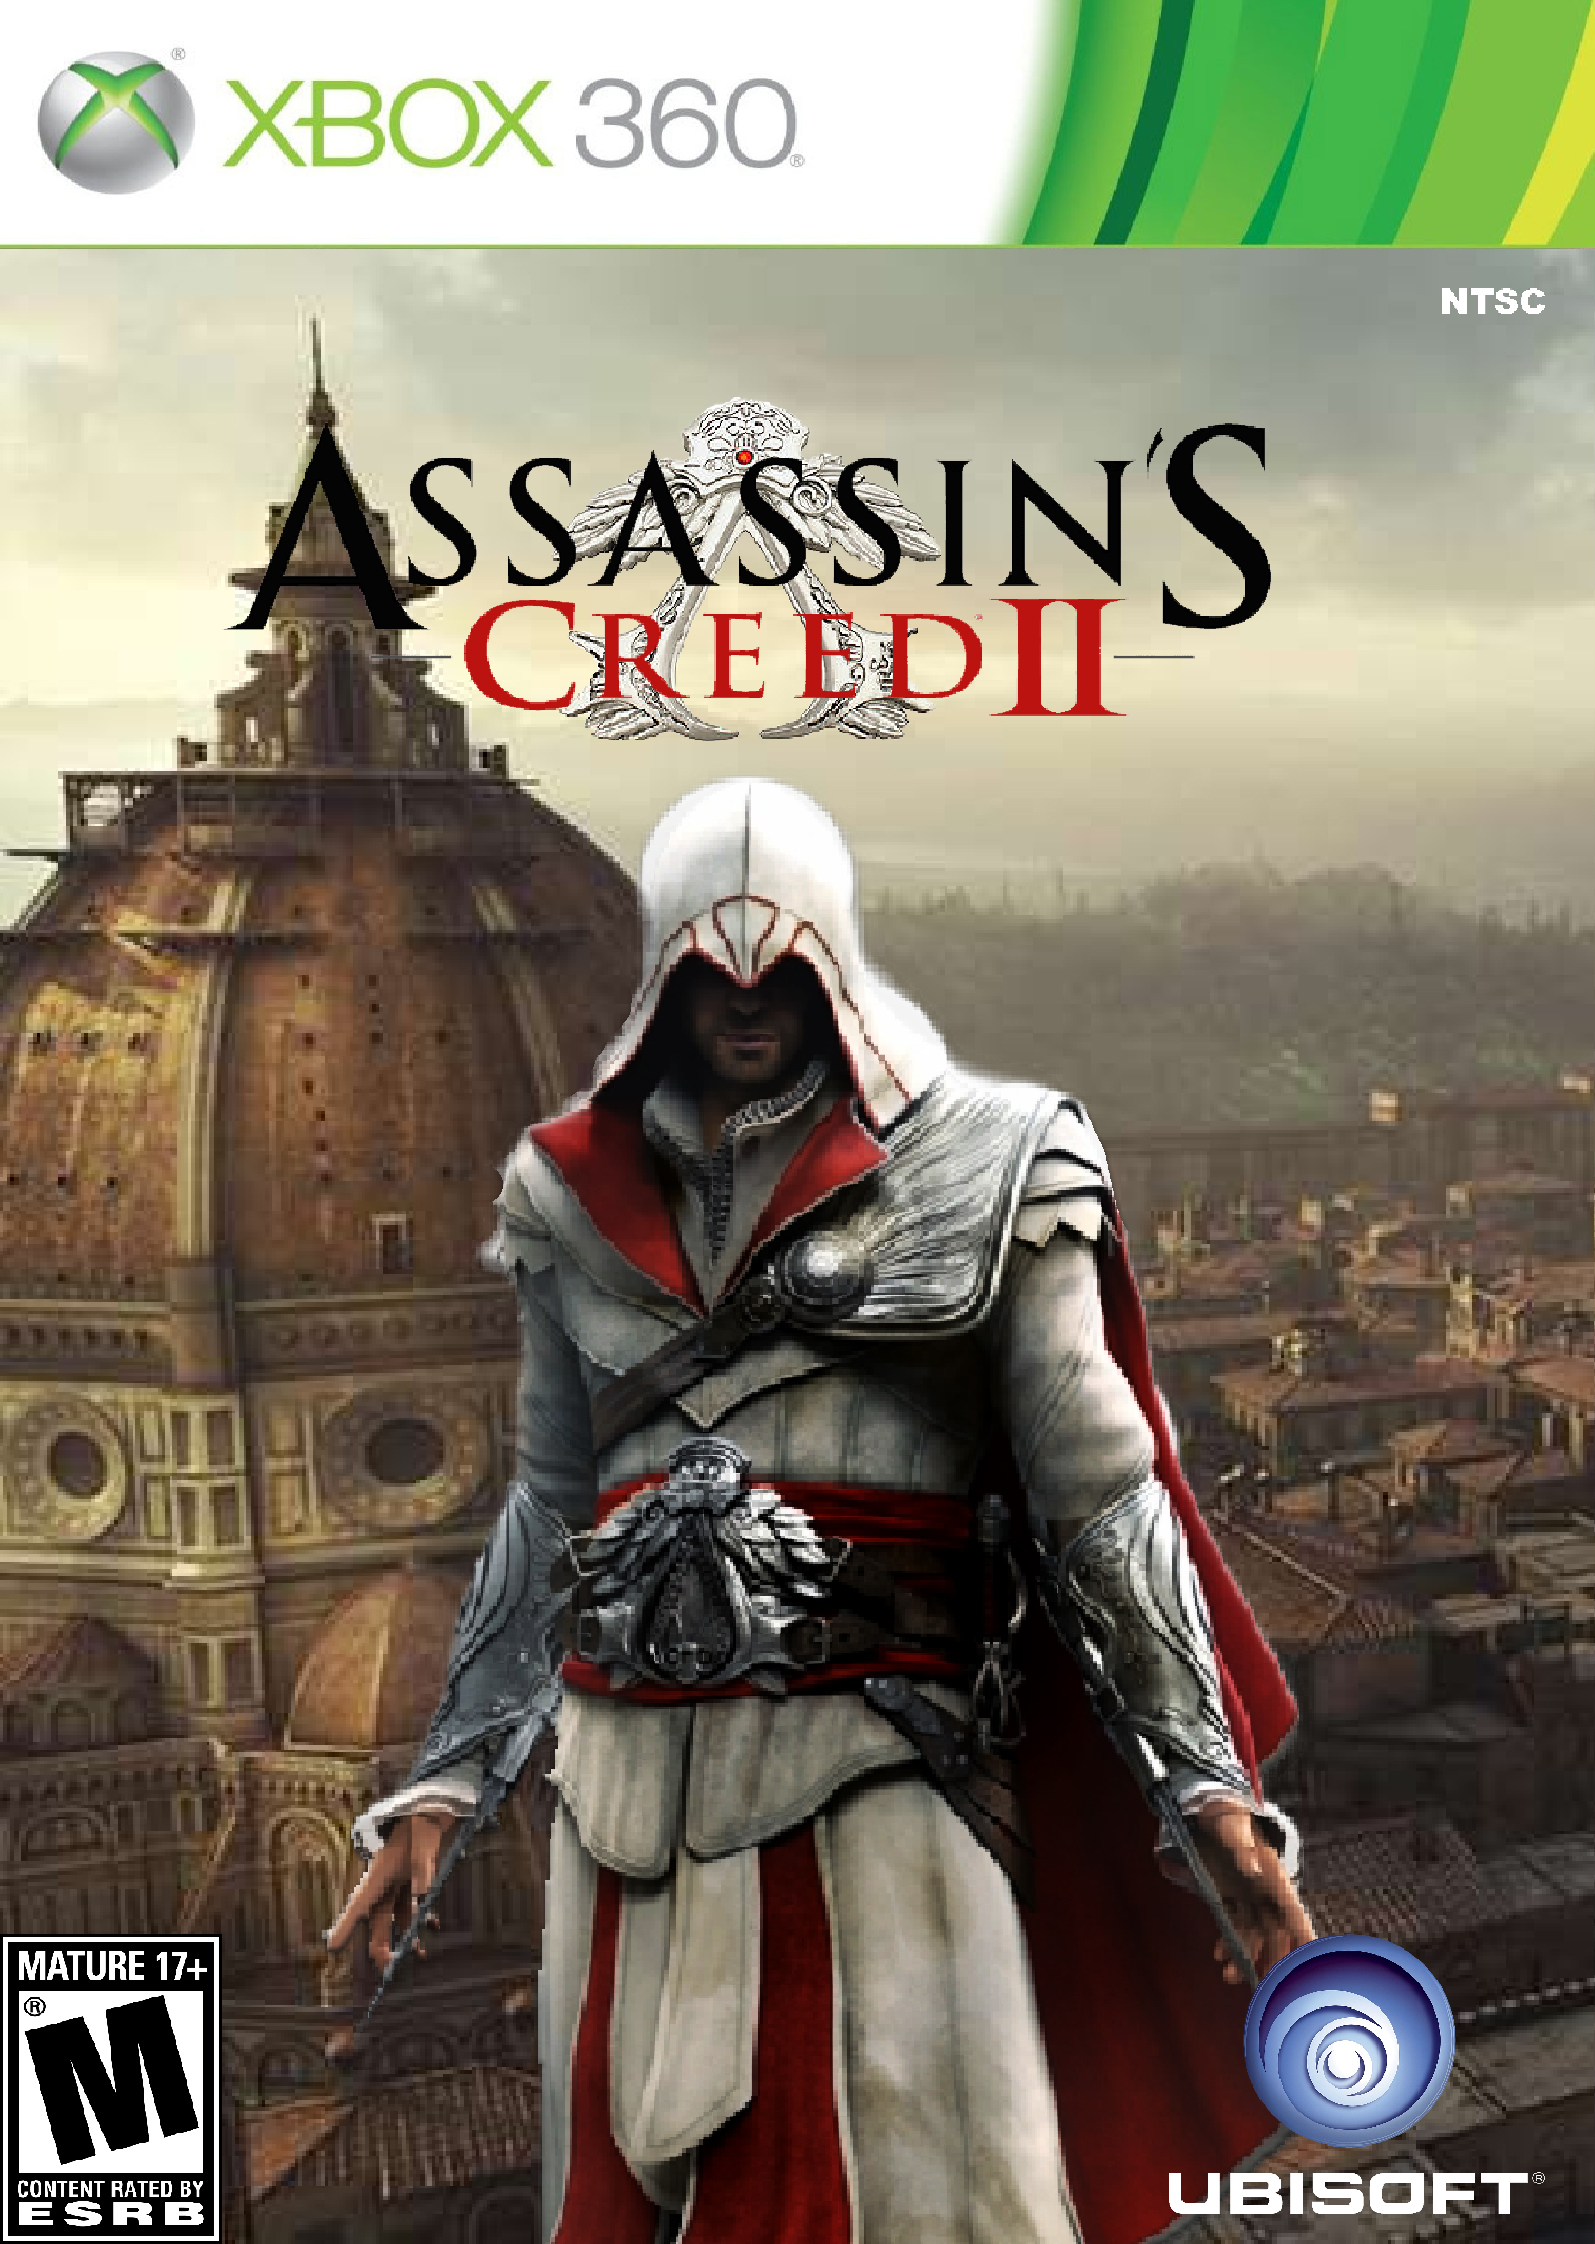 Assassin's Creed II PC Box Art Cover by GameGuy360